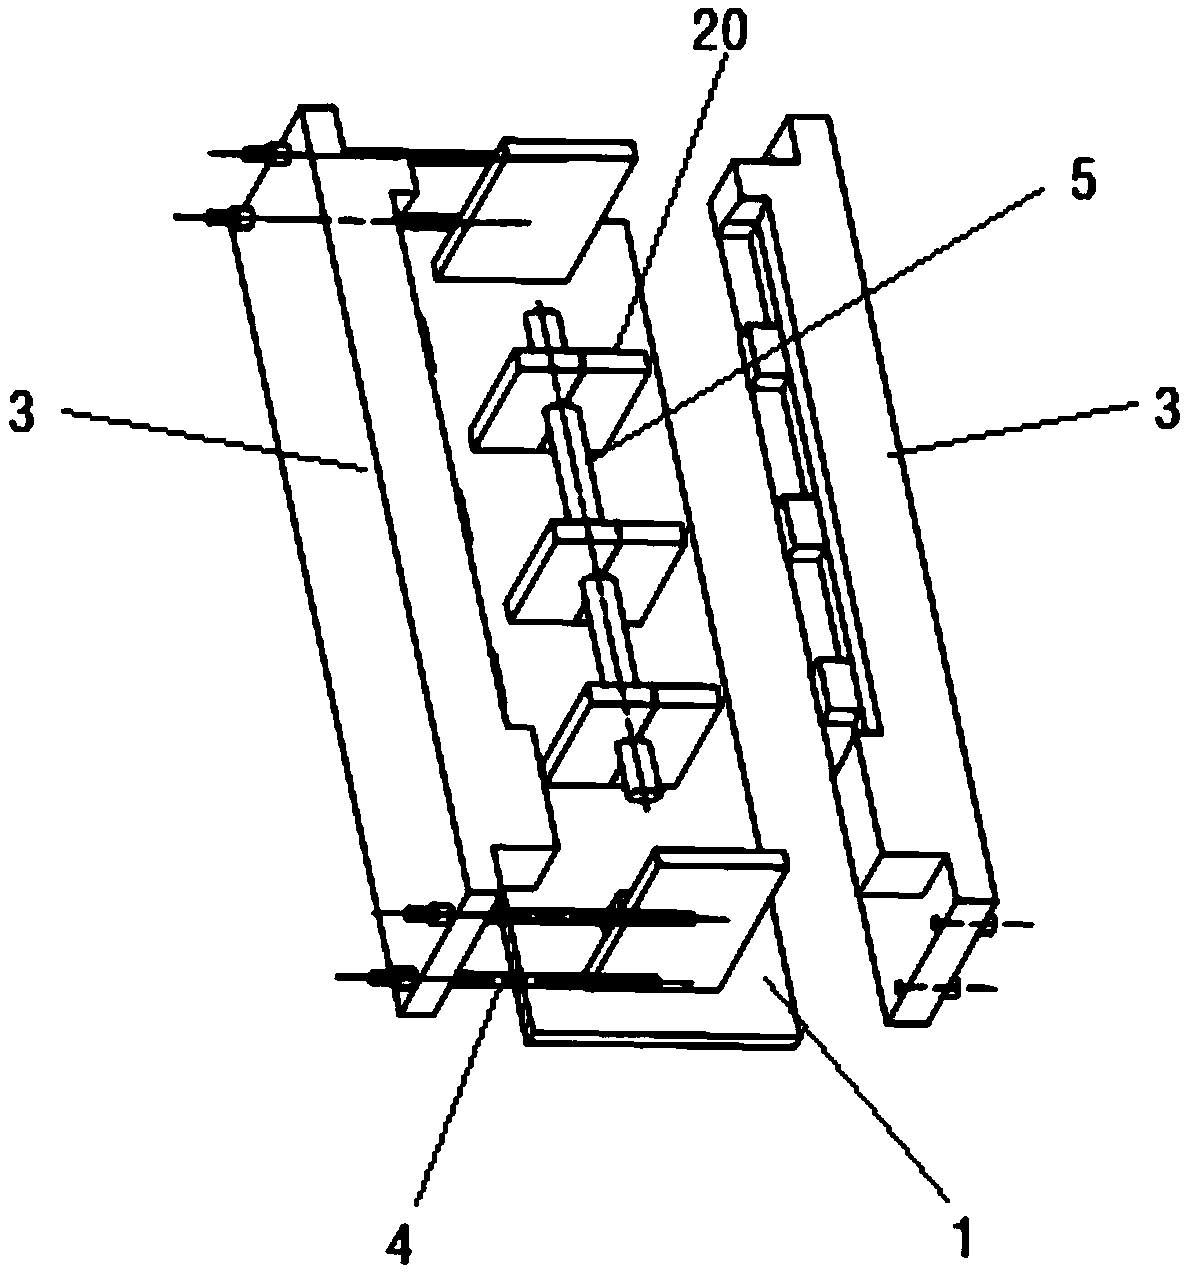 Core box and method for producing integrated sand cores